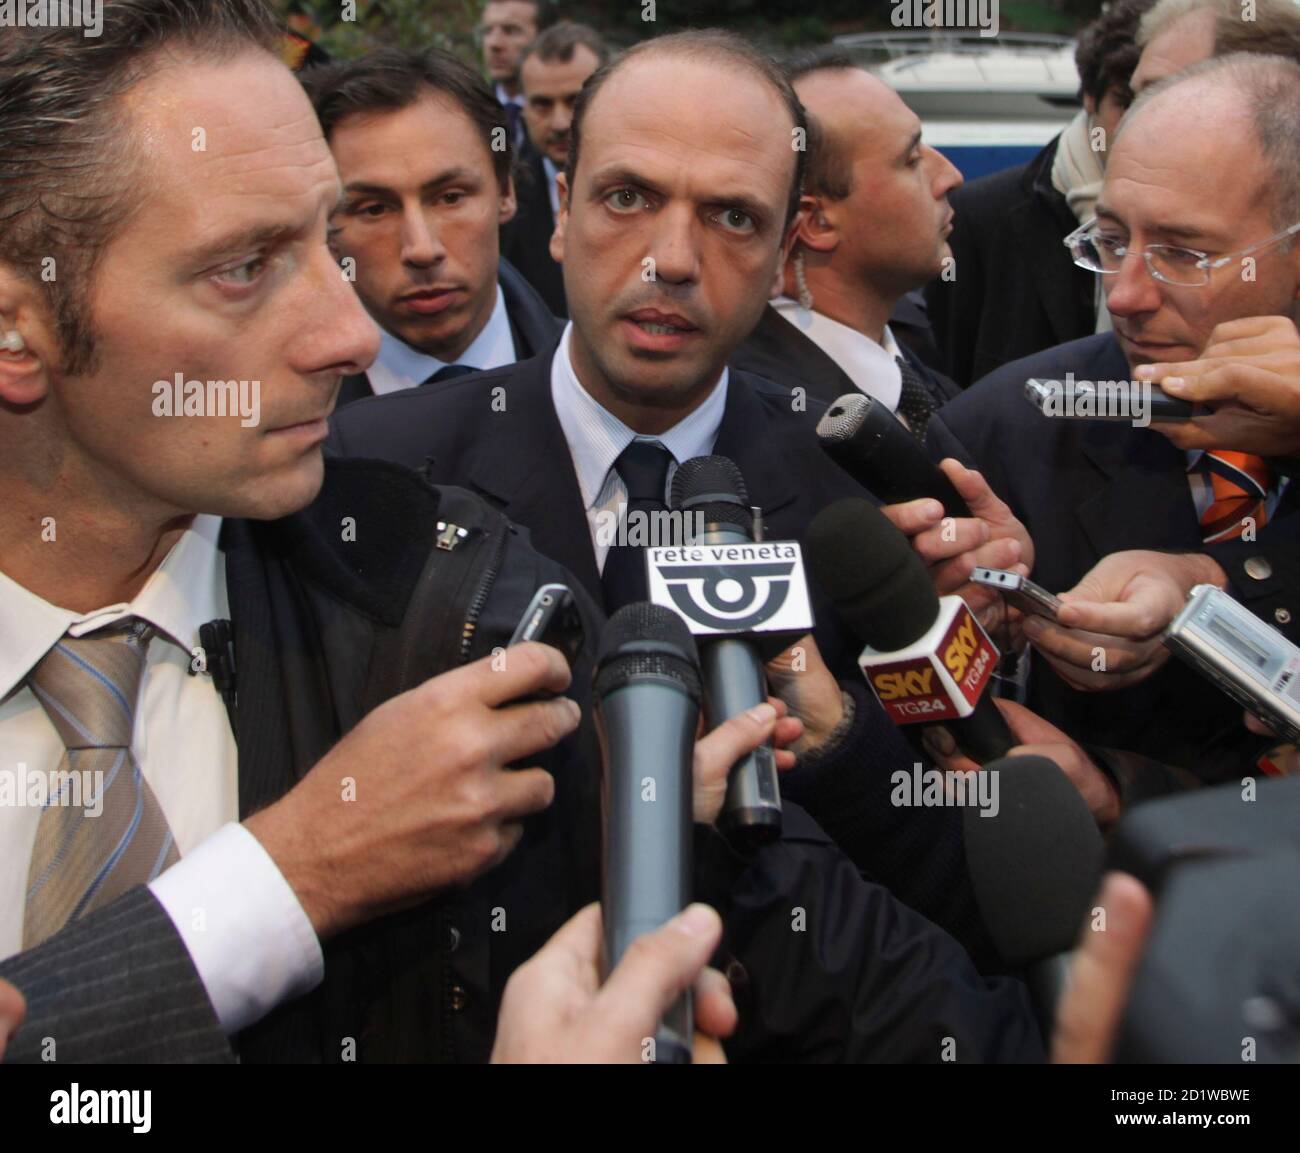 Italy's Justice Minister Angelino Alfano (C) speaks to reporters outside the annual meeting of notaries in Venice October 21, 2009. REUTERS/Manuel Silvestri       (ITALY POLITICS) Stock Photo